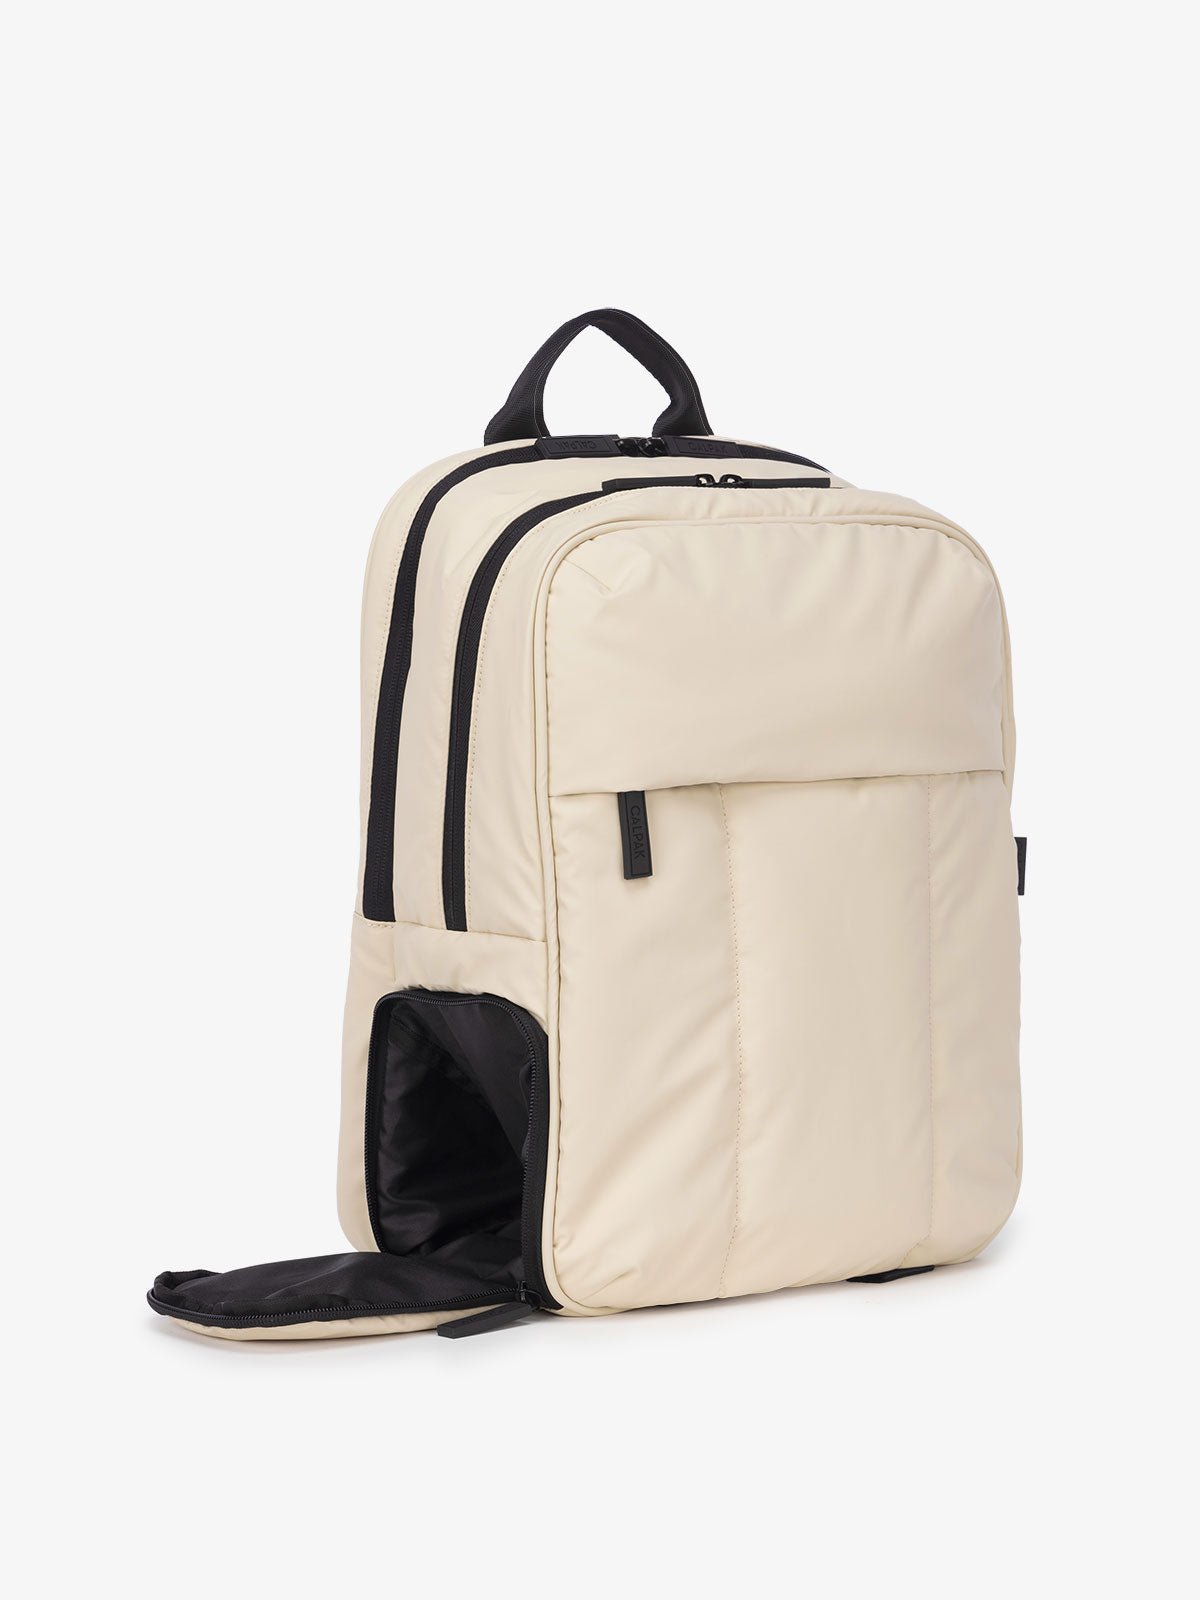 cream laptop travel backpack with shoe compartment